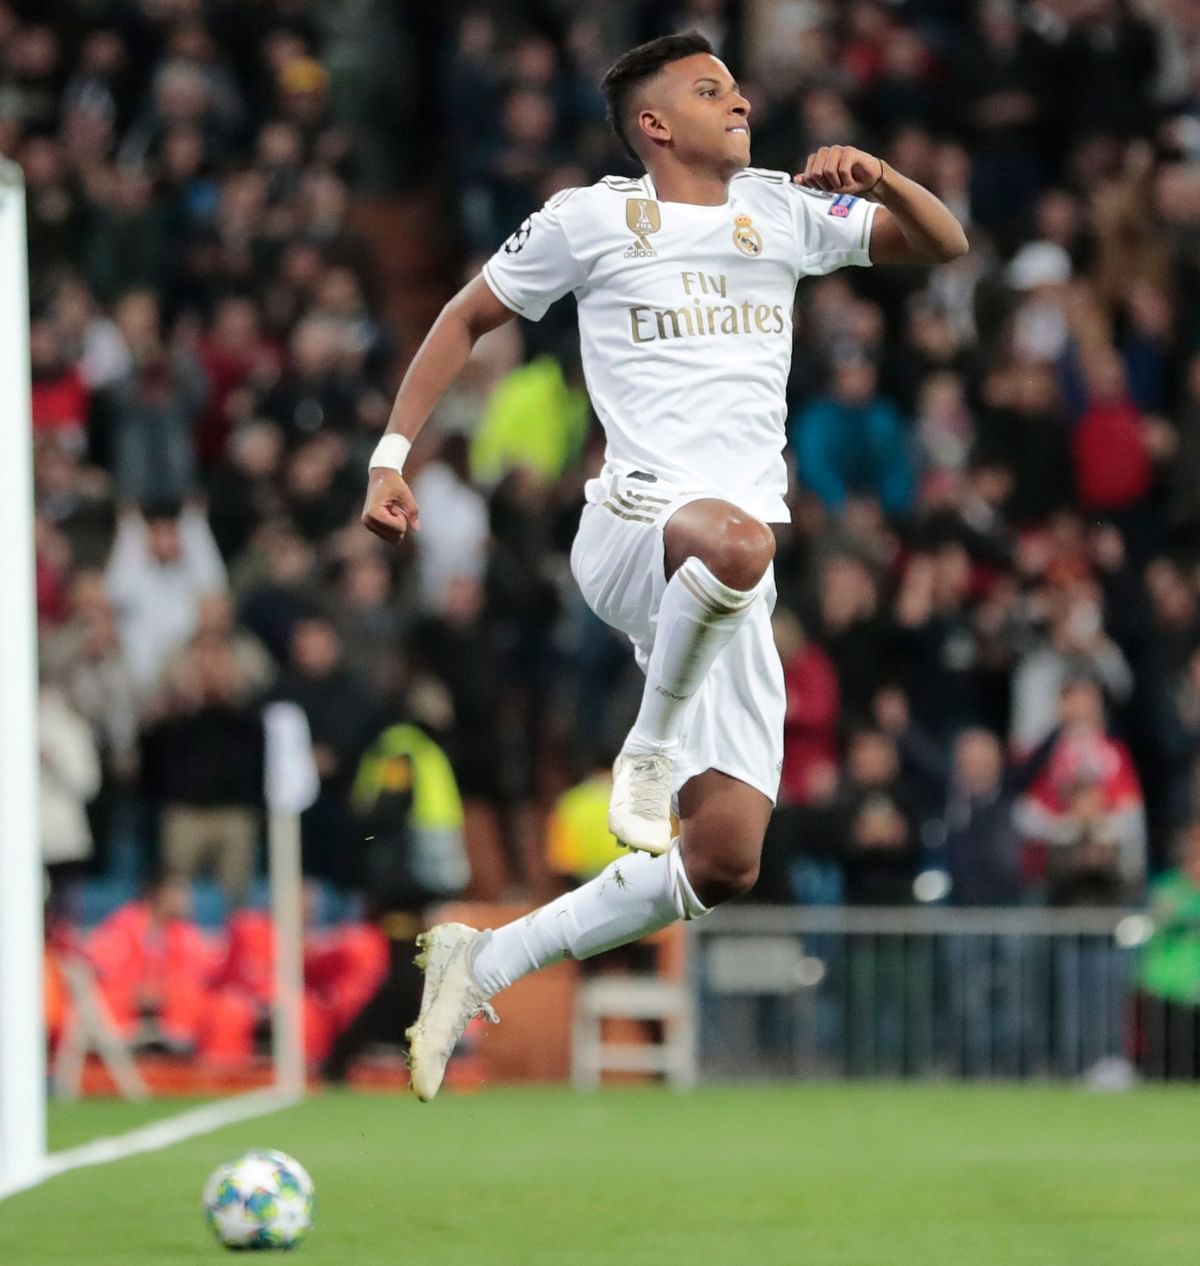 Rodrygo scored a hattrick against Galatasaray in the Champions League.